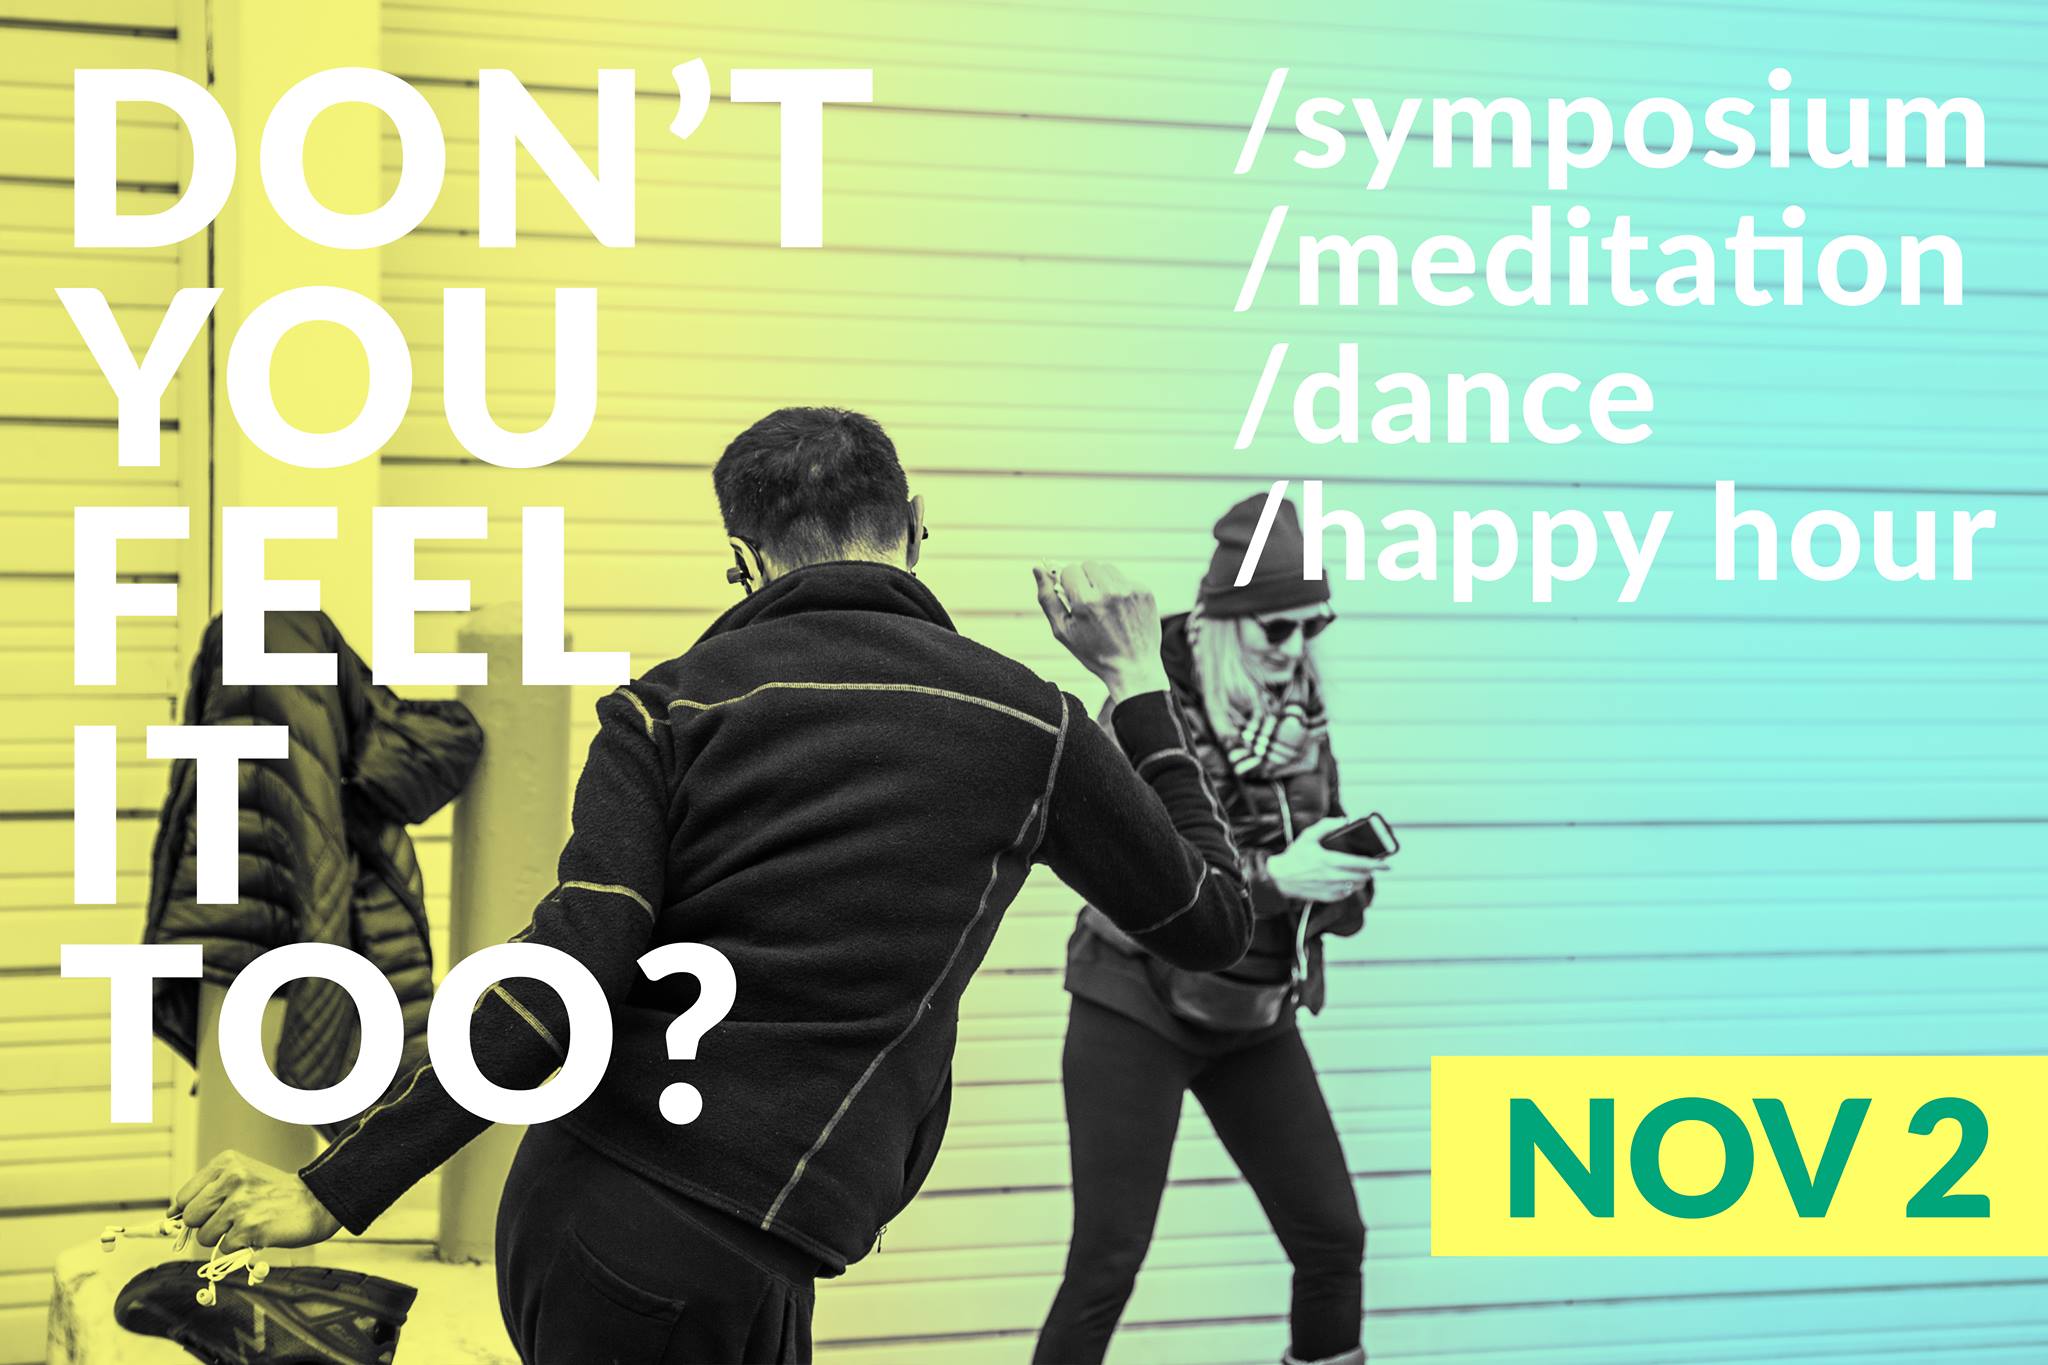 two people dancing with headphones in with text "Don't You Feel It Too? /Symposium /meditation /dance /happy hour Nov 2"